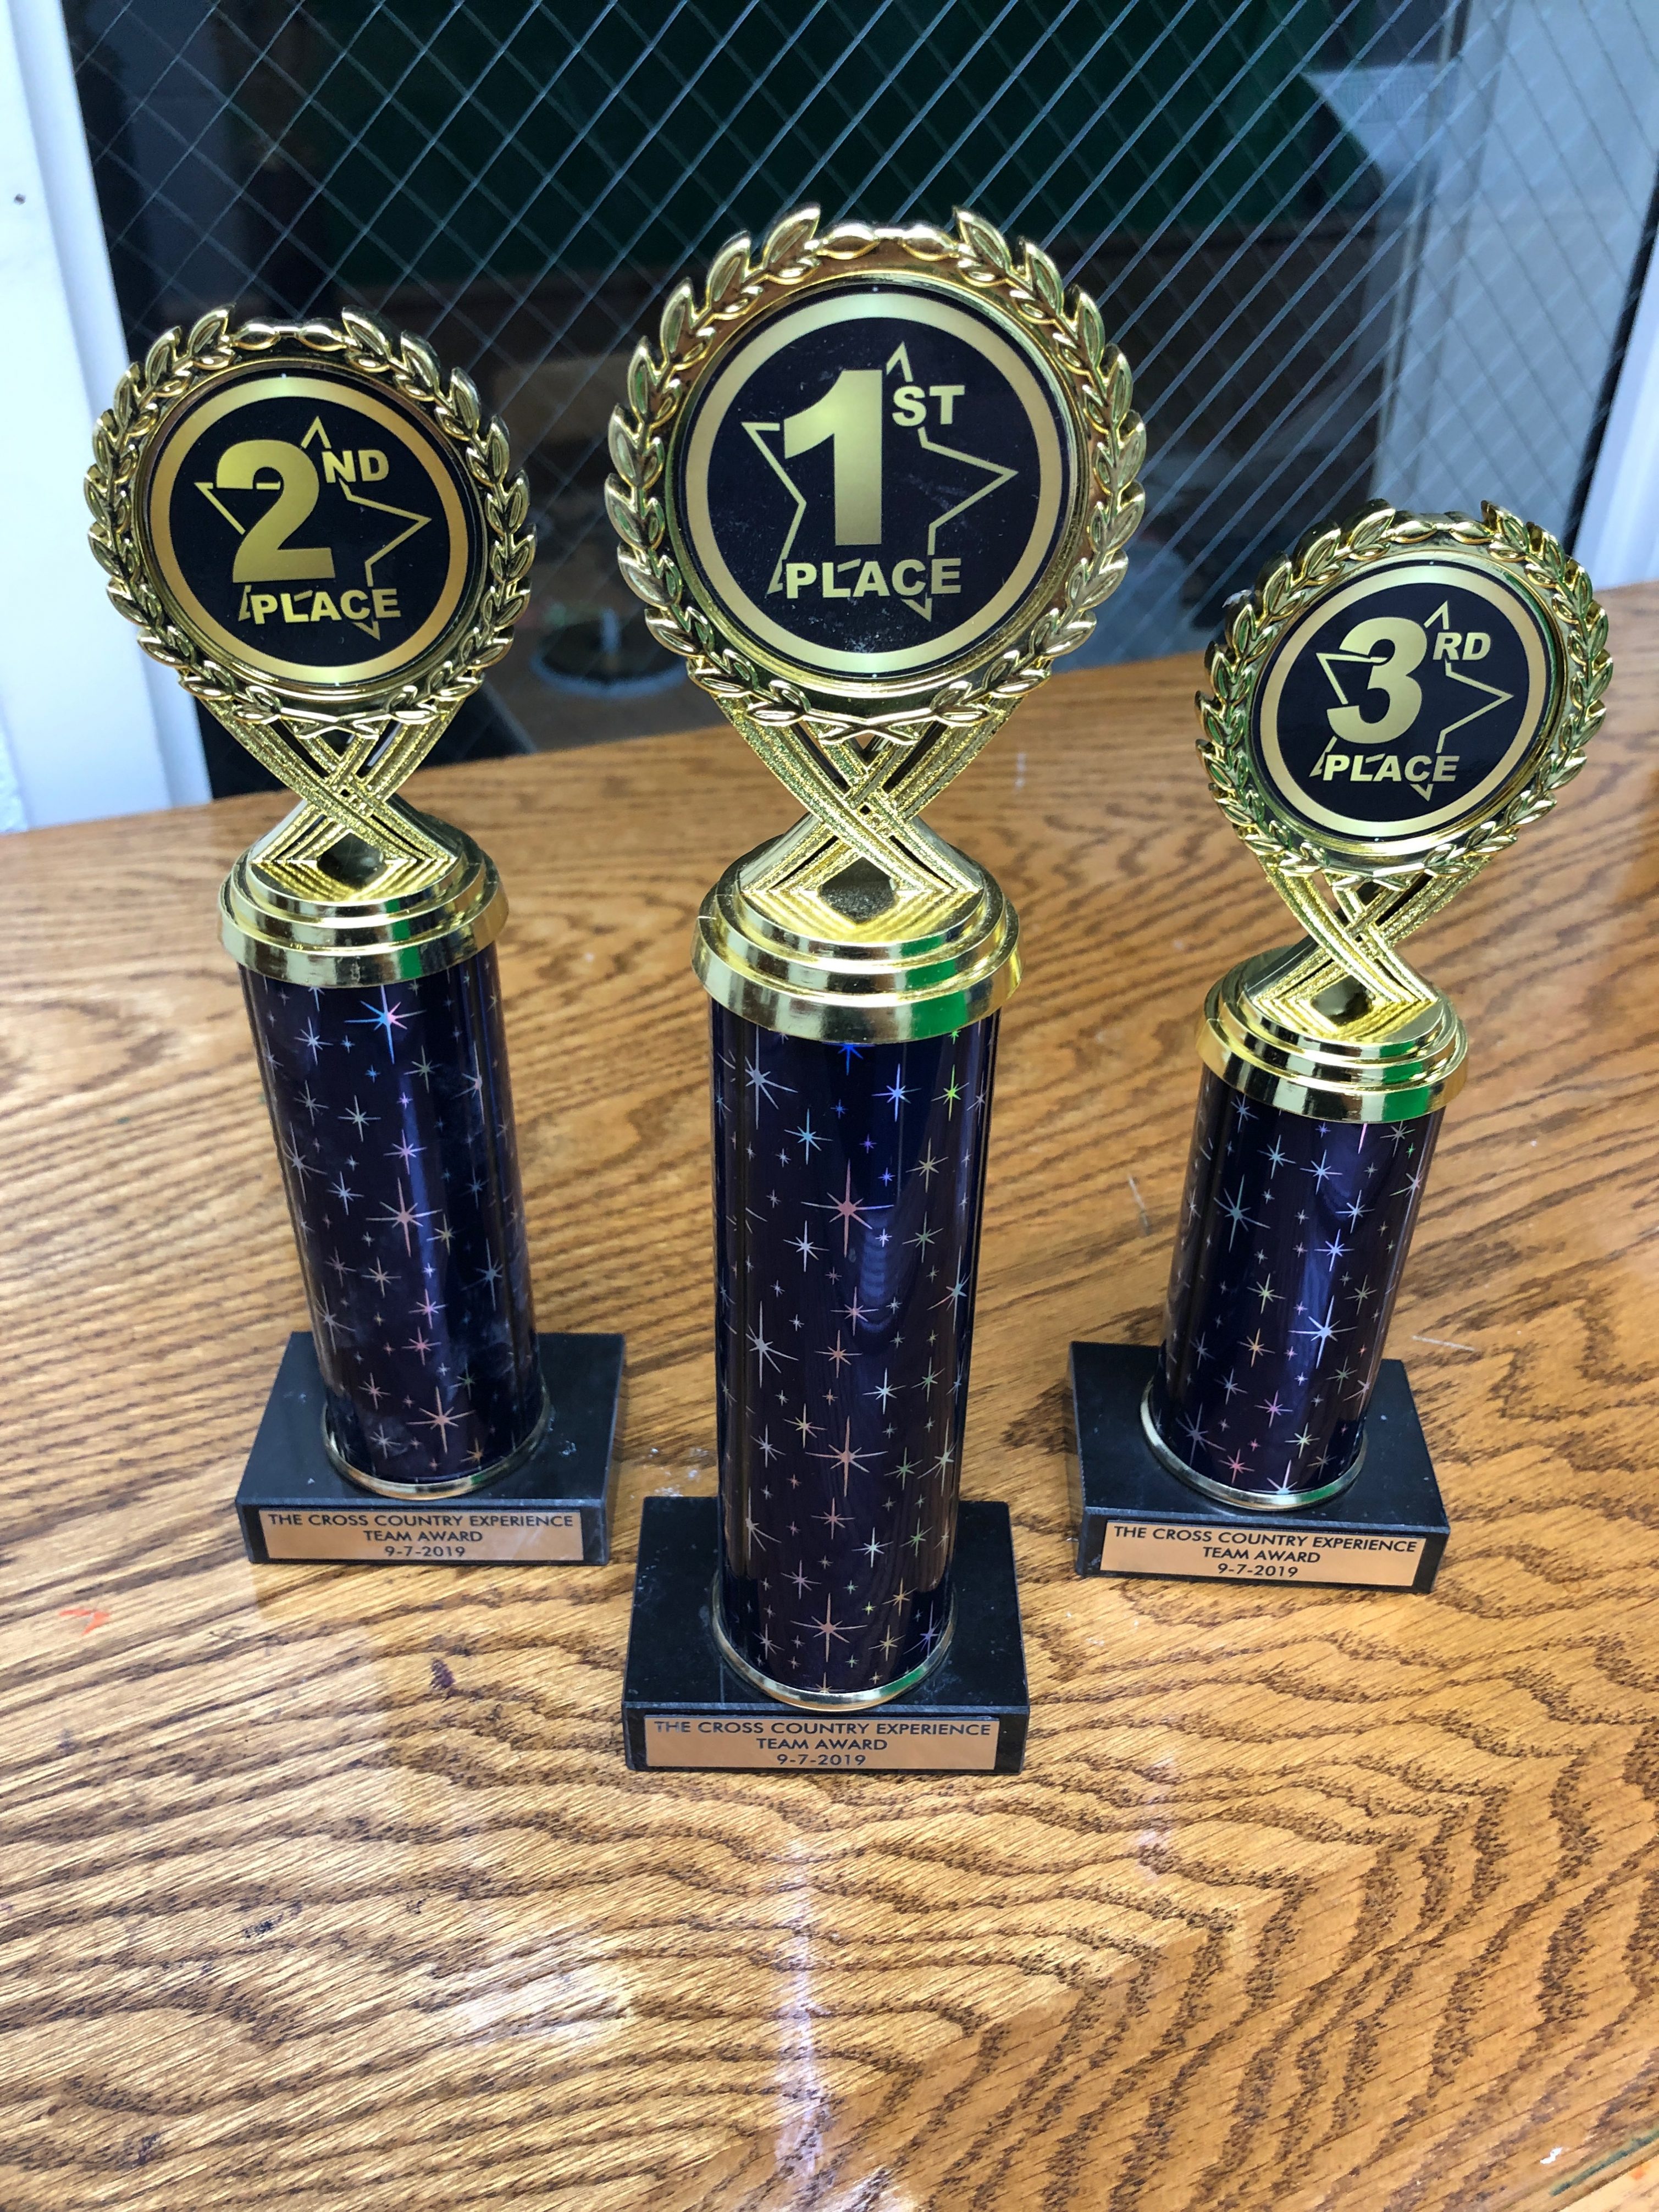 Trophies are awarded to the three fastest teams.